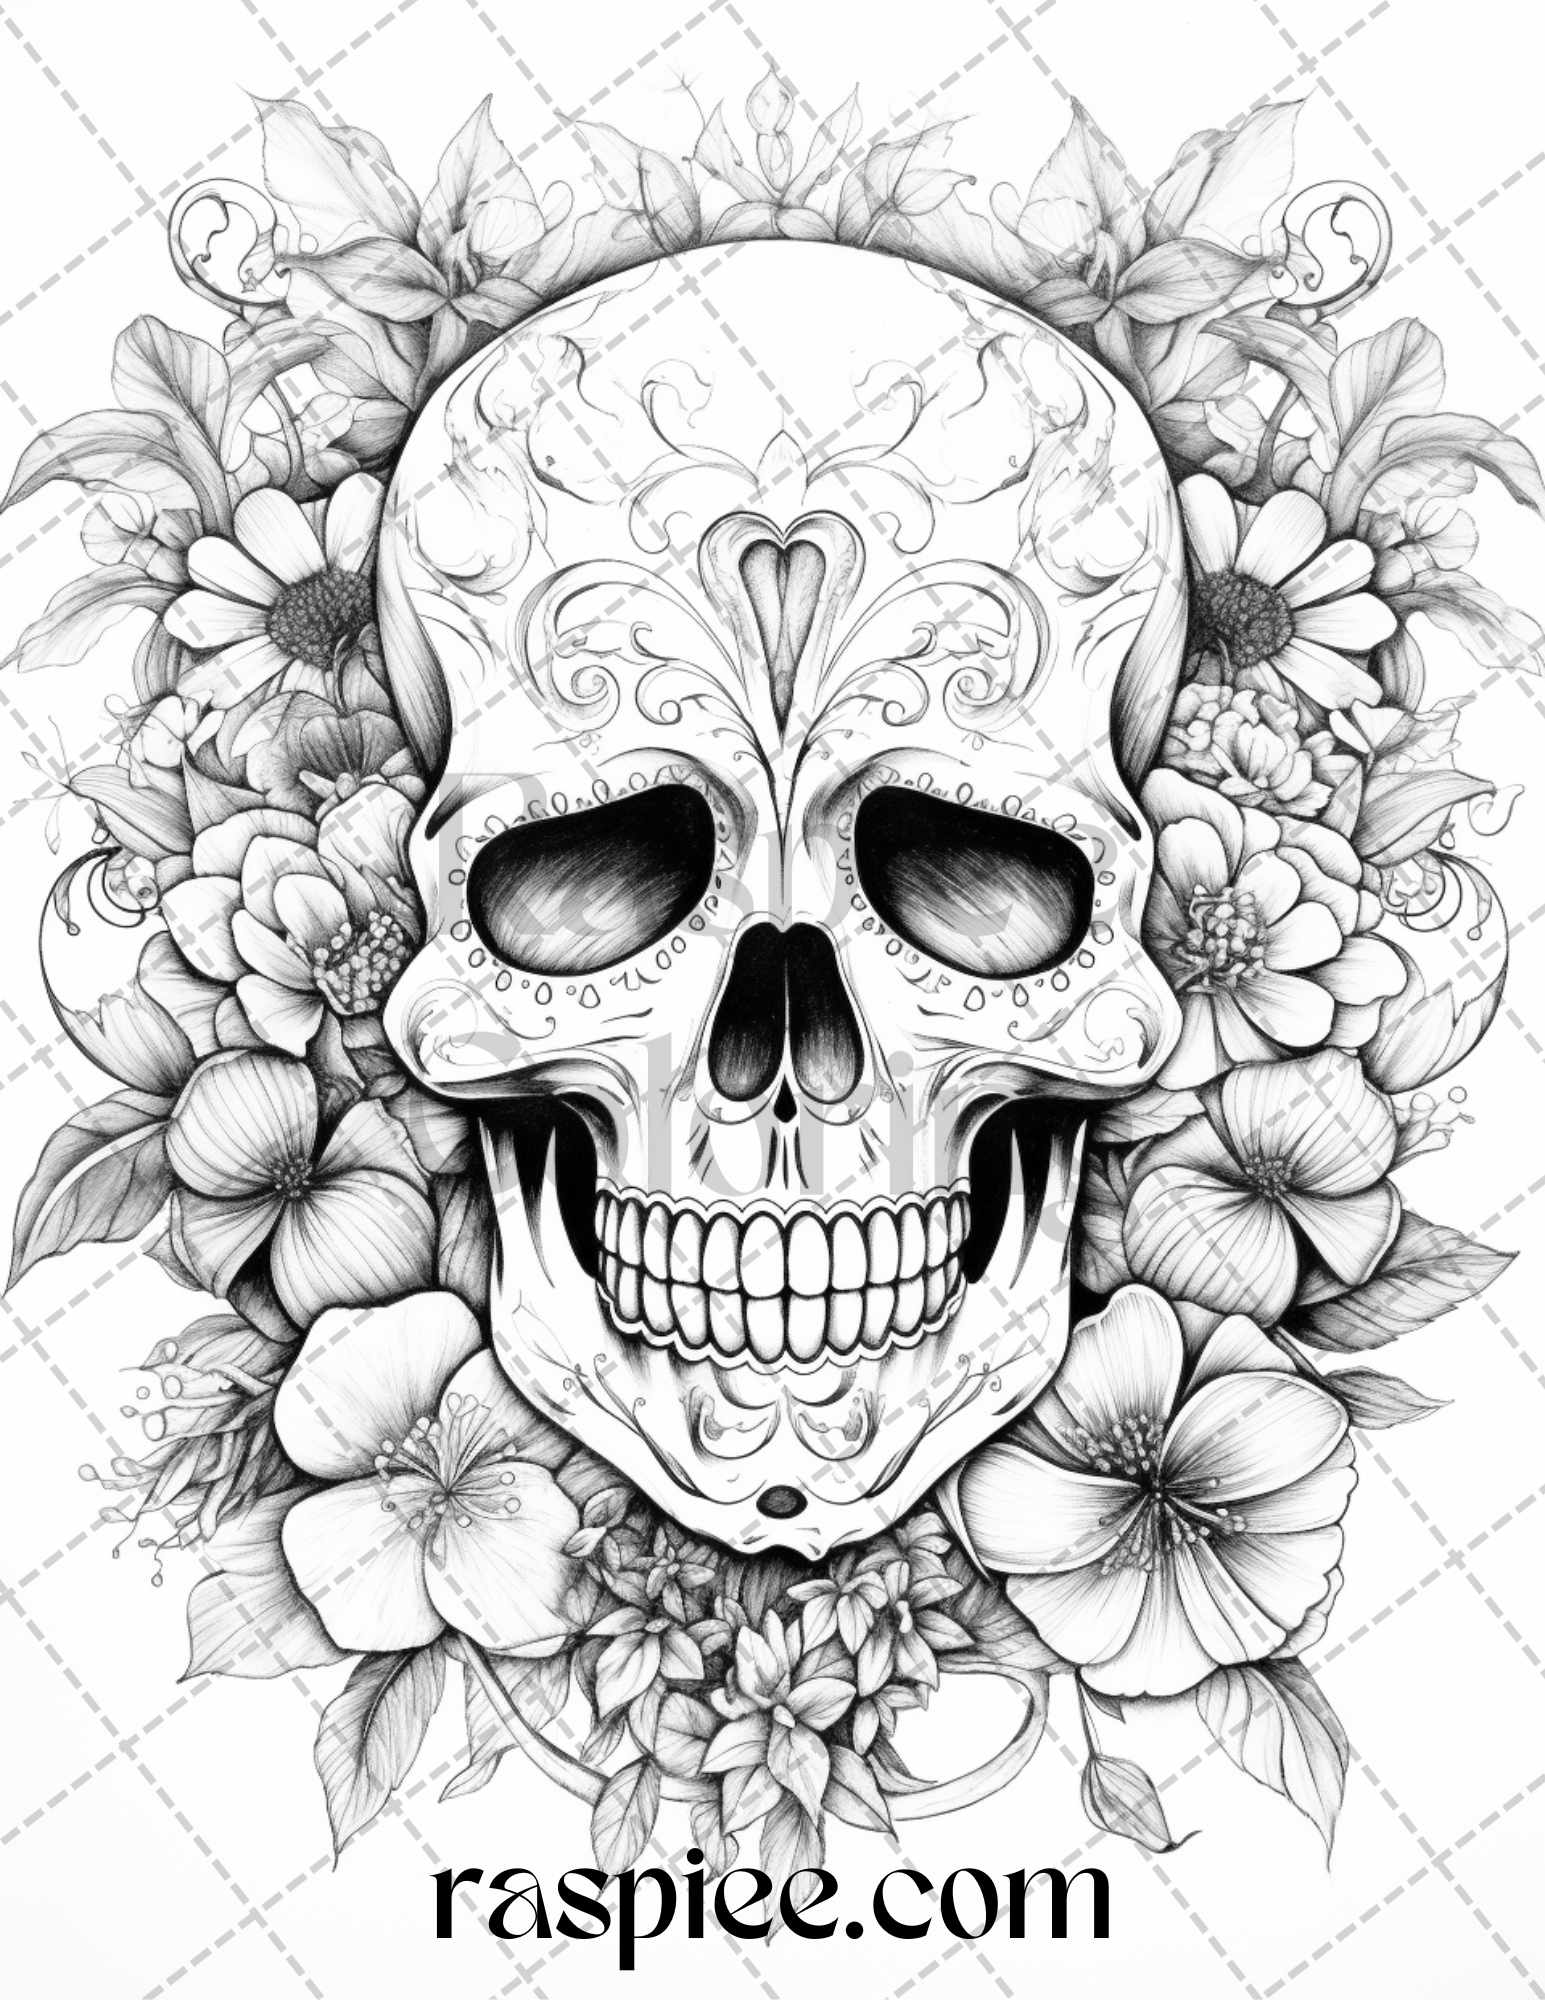 Floral skull grayscale coloring pages for adults stress relief col â coloring